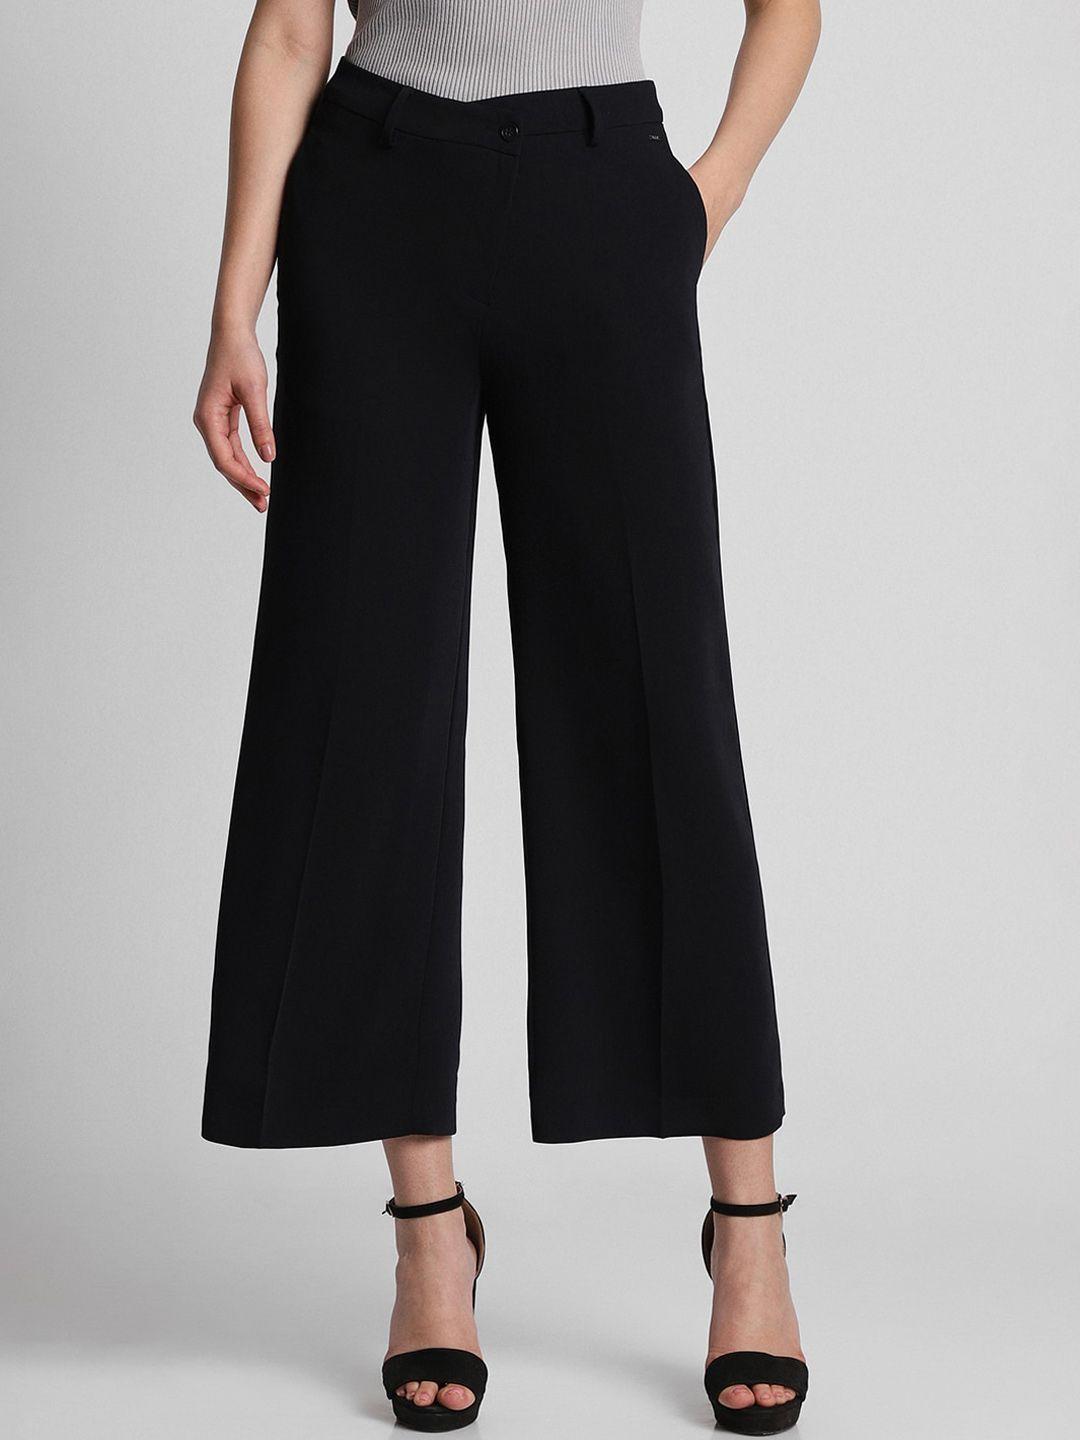 allen solly woman mid rise cropped culottes trousers